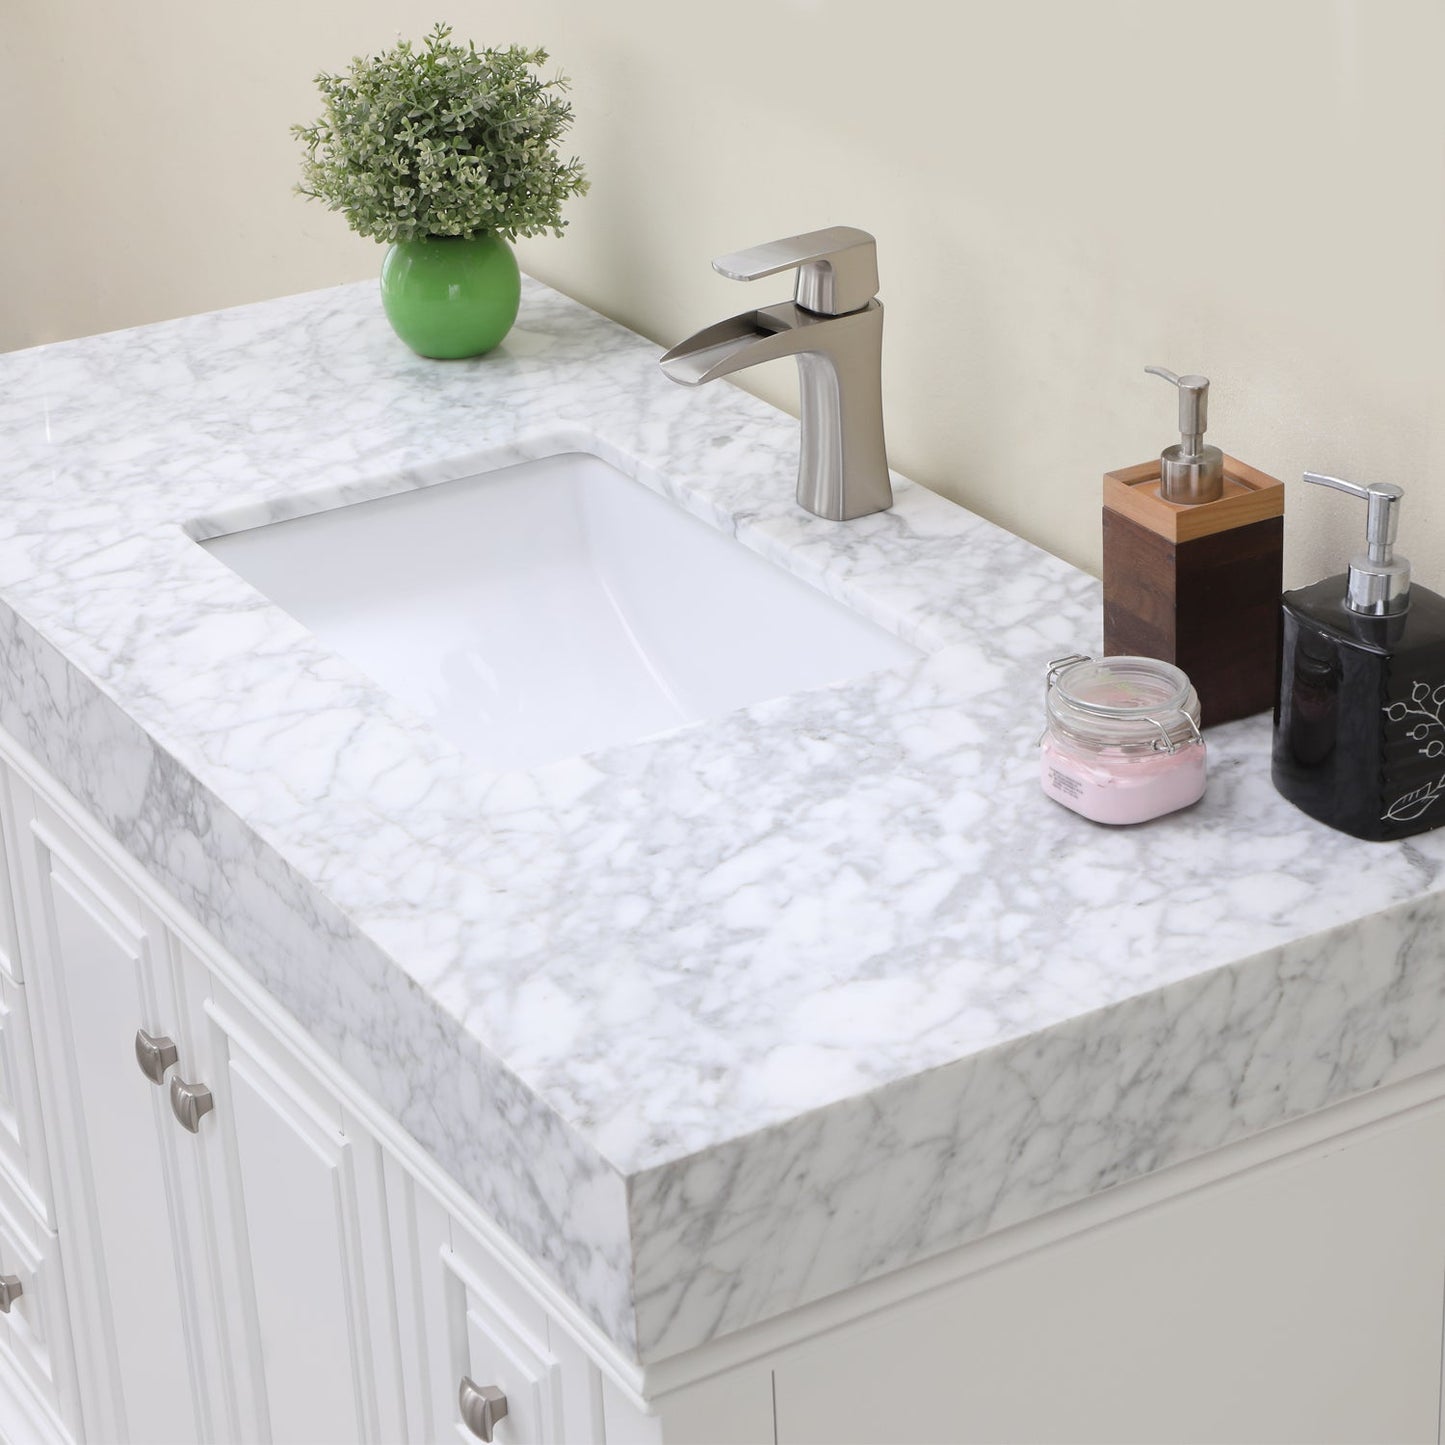 Jardin 48" Single Bathroom Vanity Set in White and Carrara White Marble Countertop without Mirror